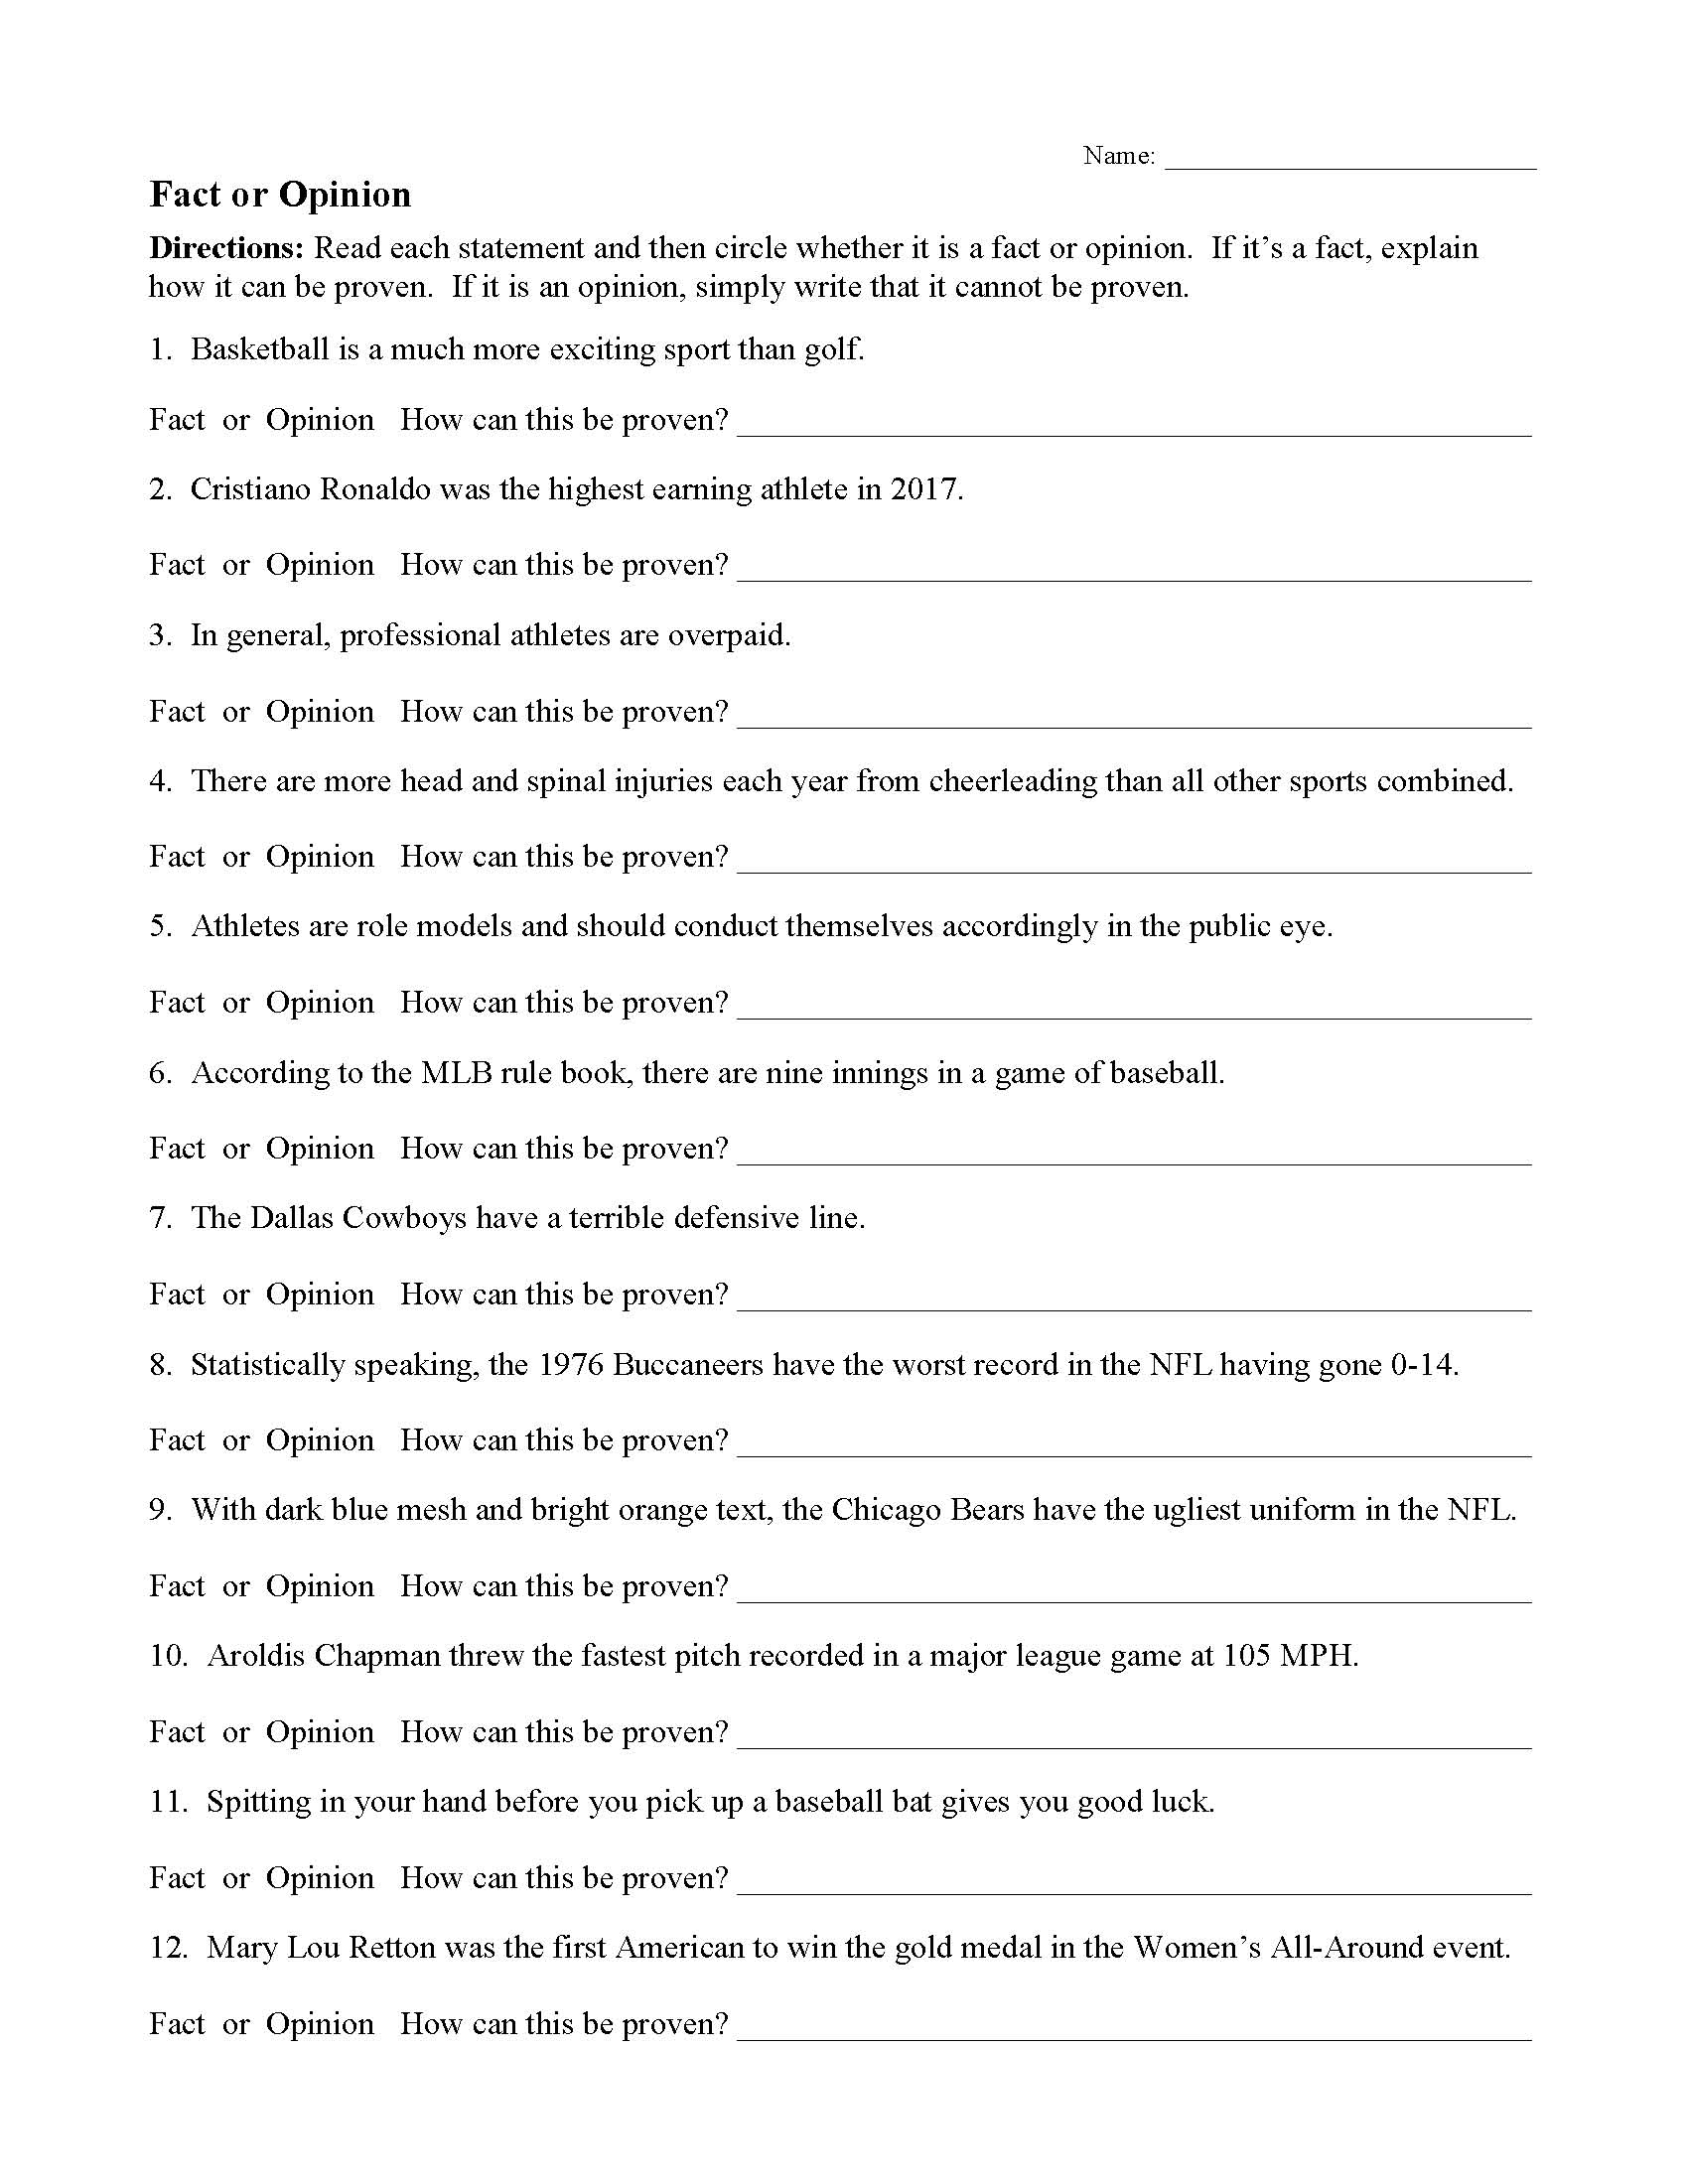 fact and opinion worksheets reading comprehension